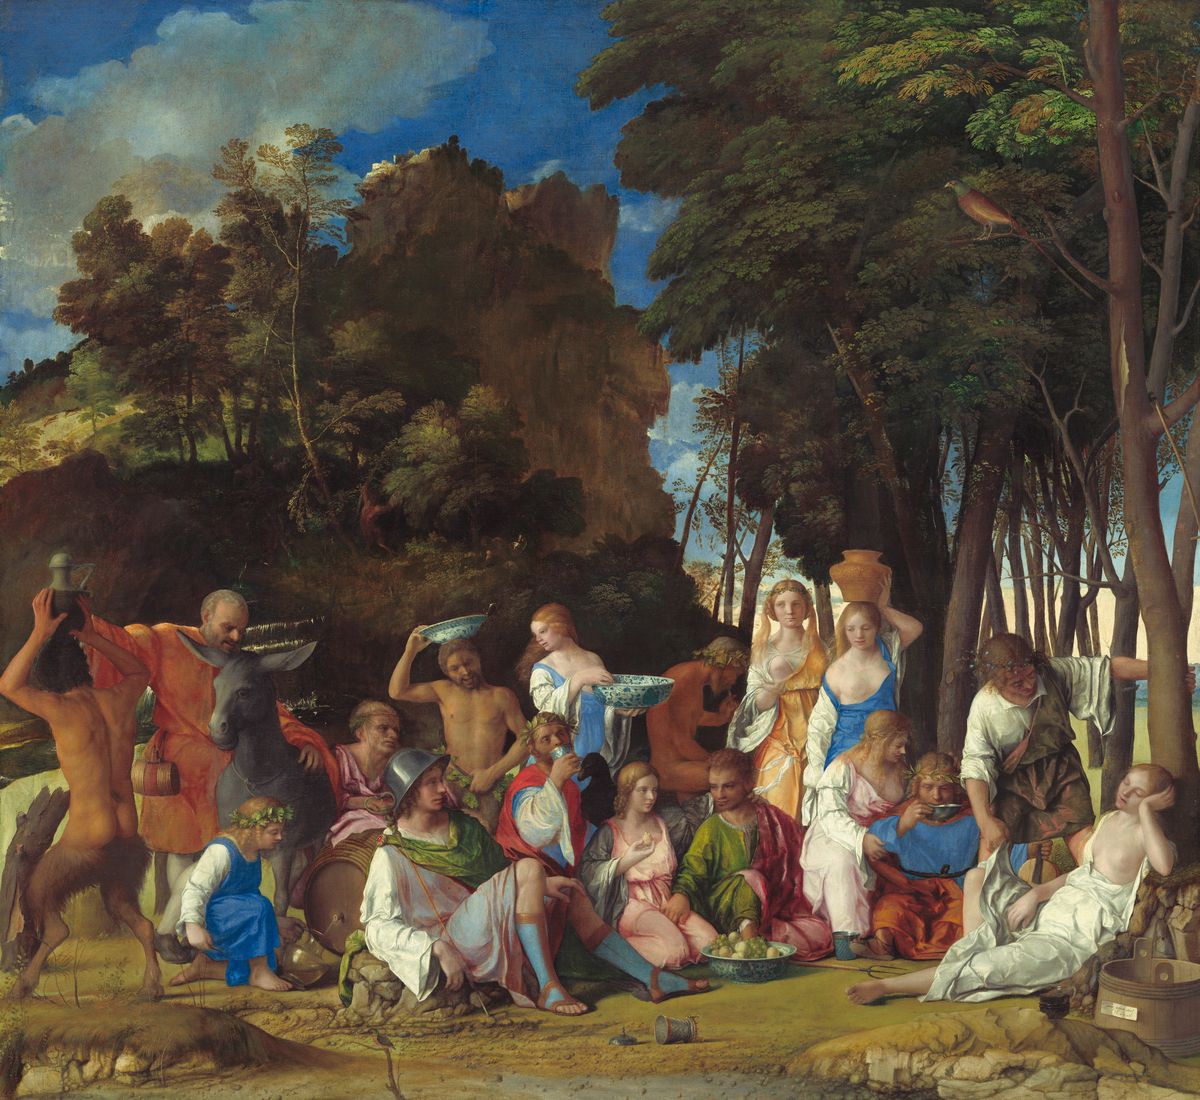 The Feast of the Gods by Giovanni Bellini